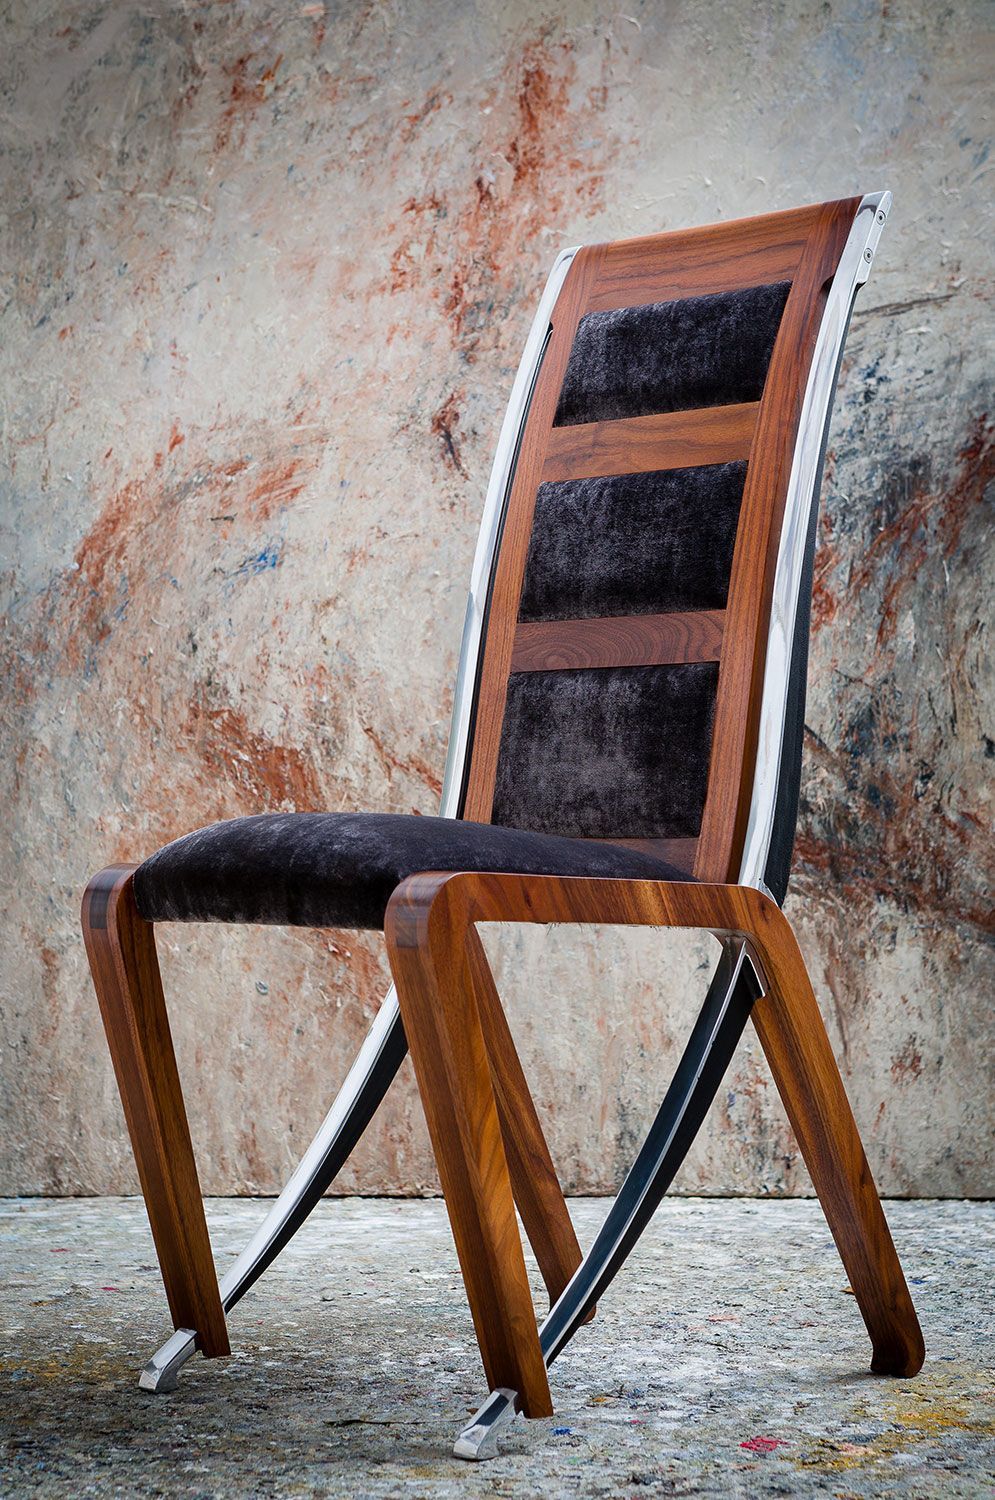 A  bespoke wooden chair with a black cushion is sitting in front of a wall.